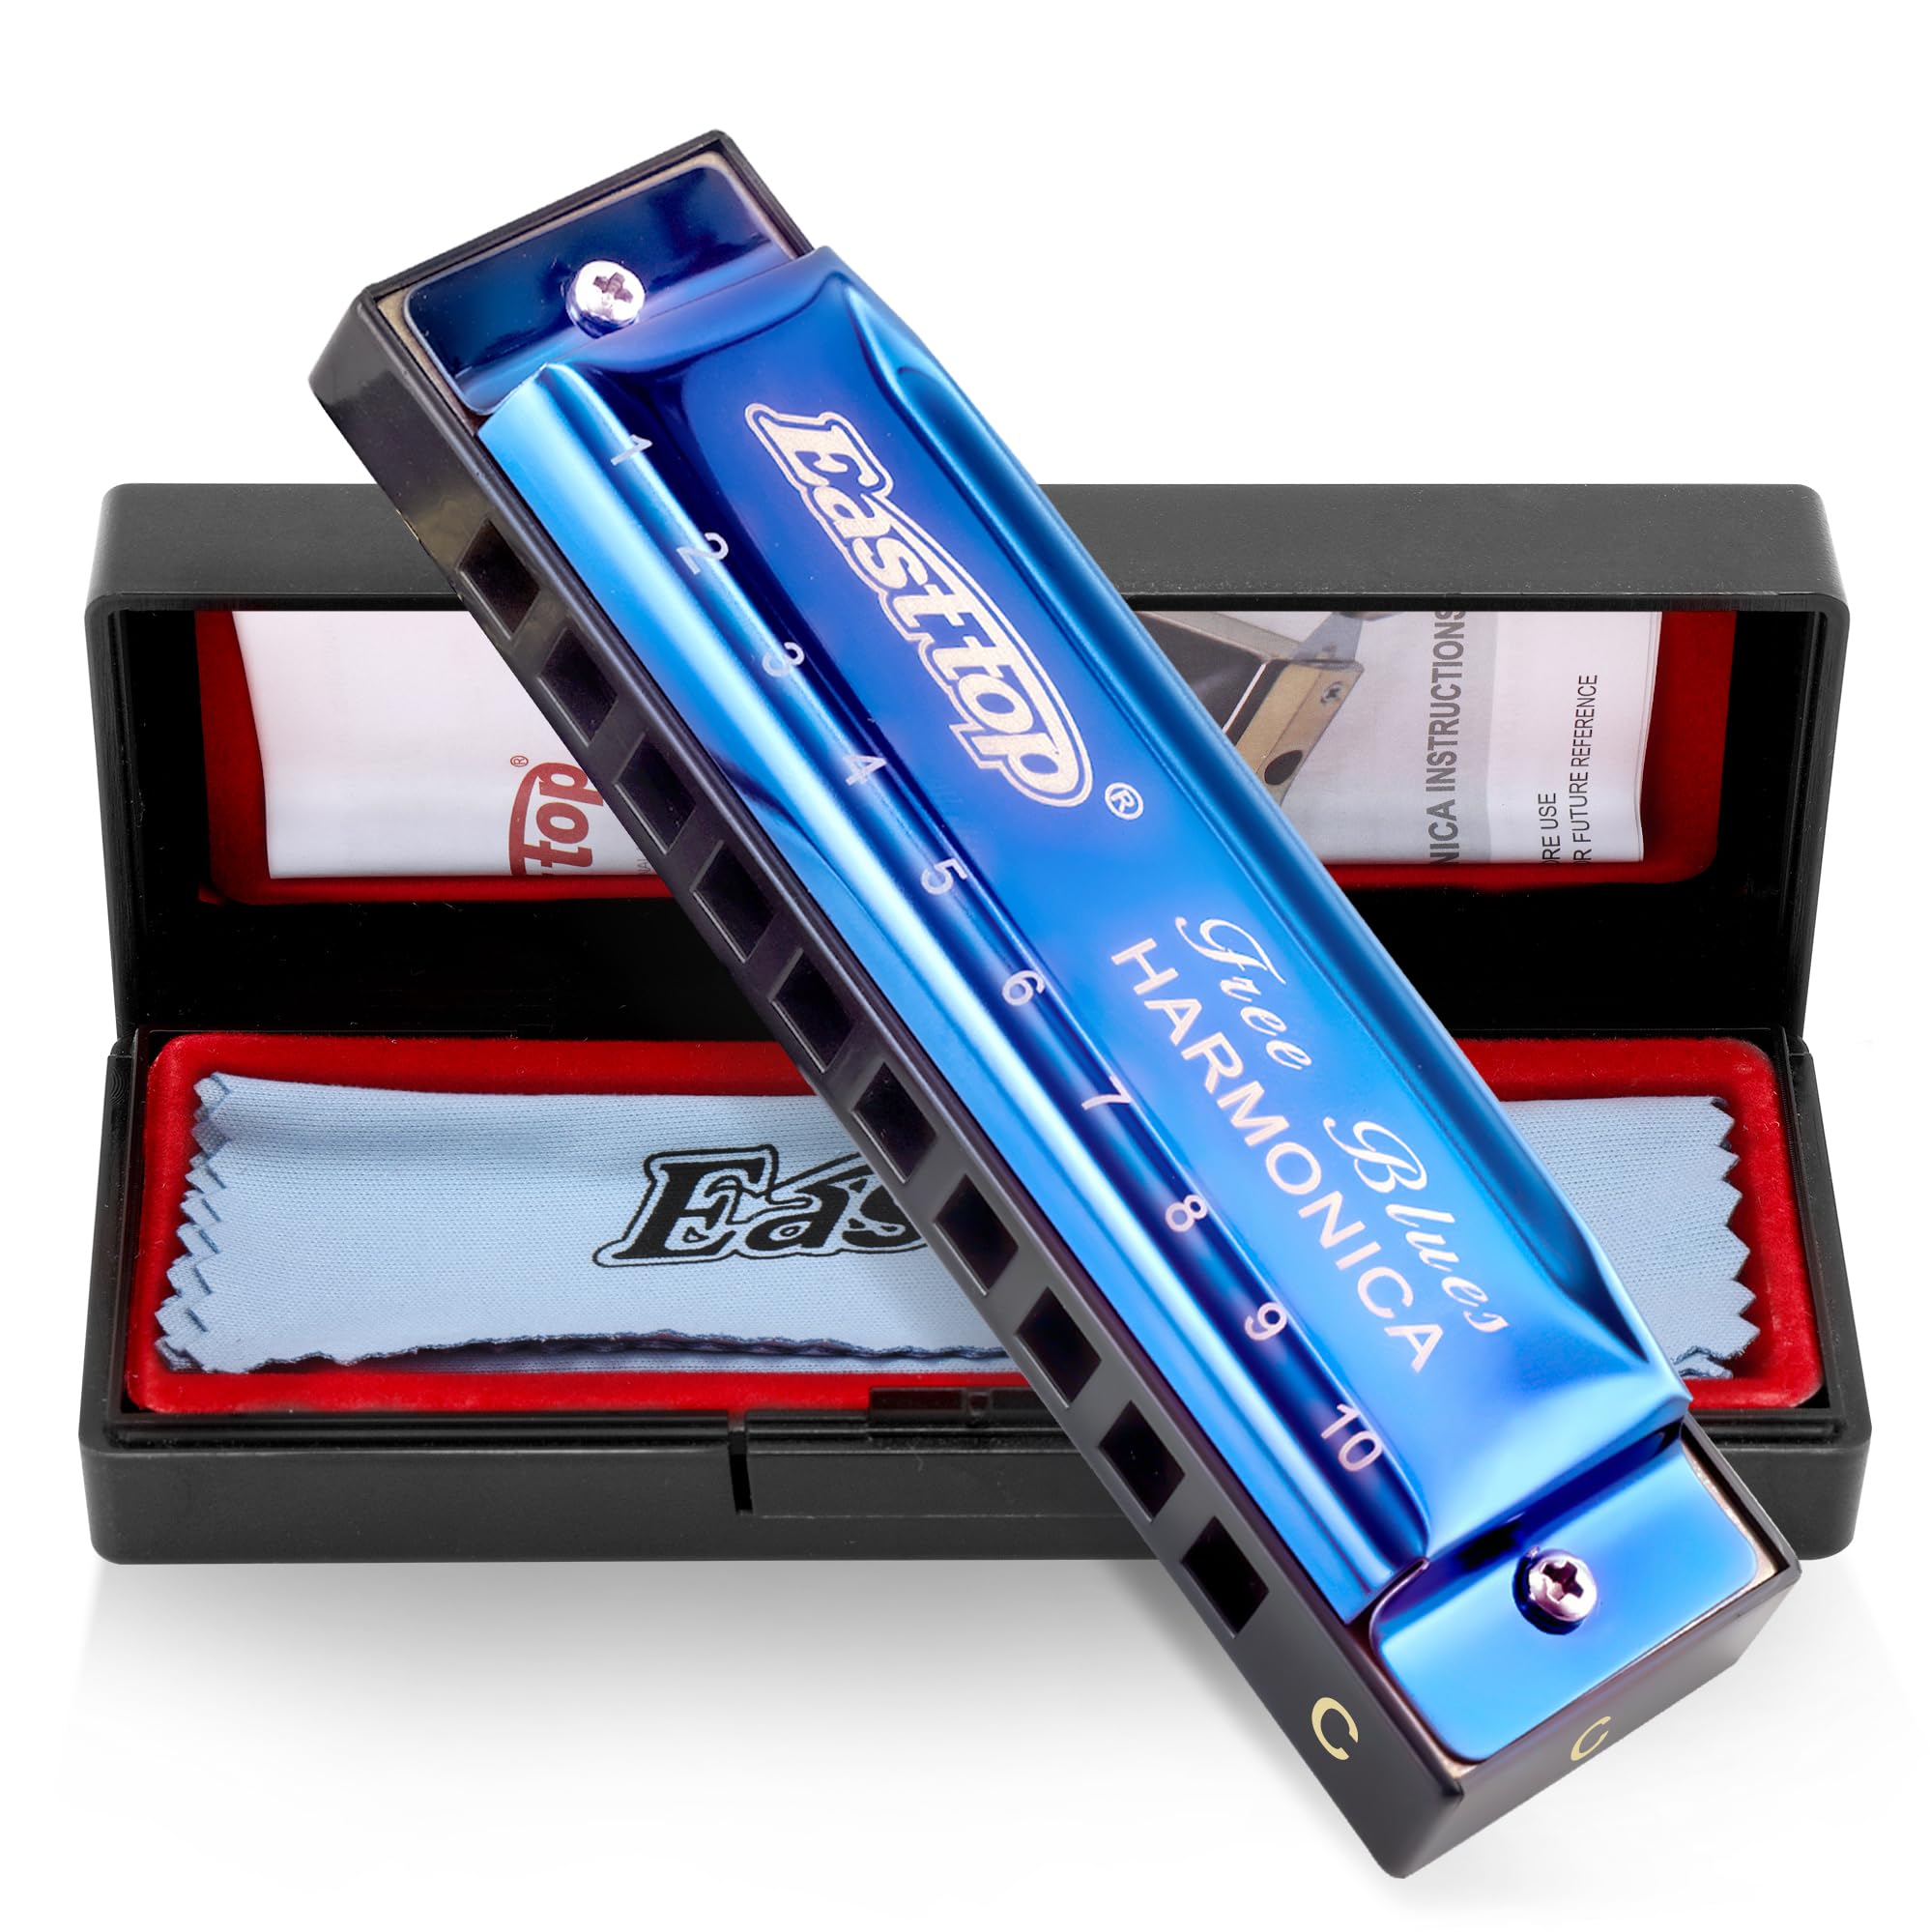 East top Blues Harmonica 10 Holes 20 Tones Blues Harp Diatonic Mouth Organ Harmonica For Adults, Professional players and Students(T003) - Easttop harmonica